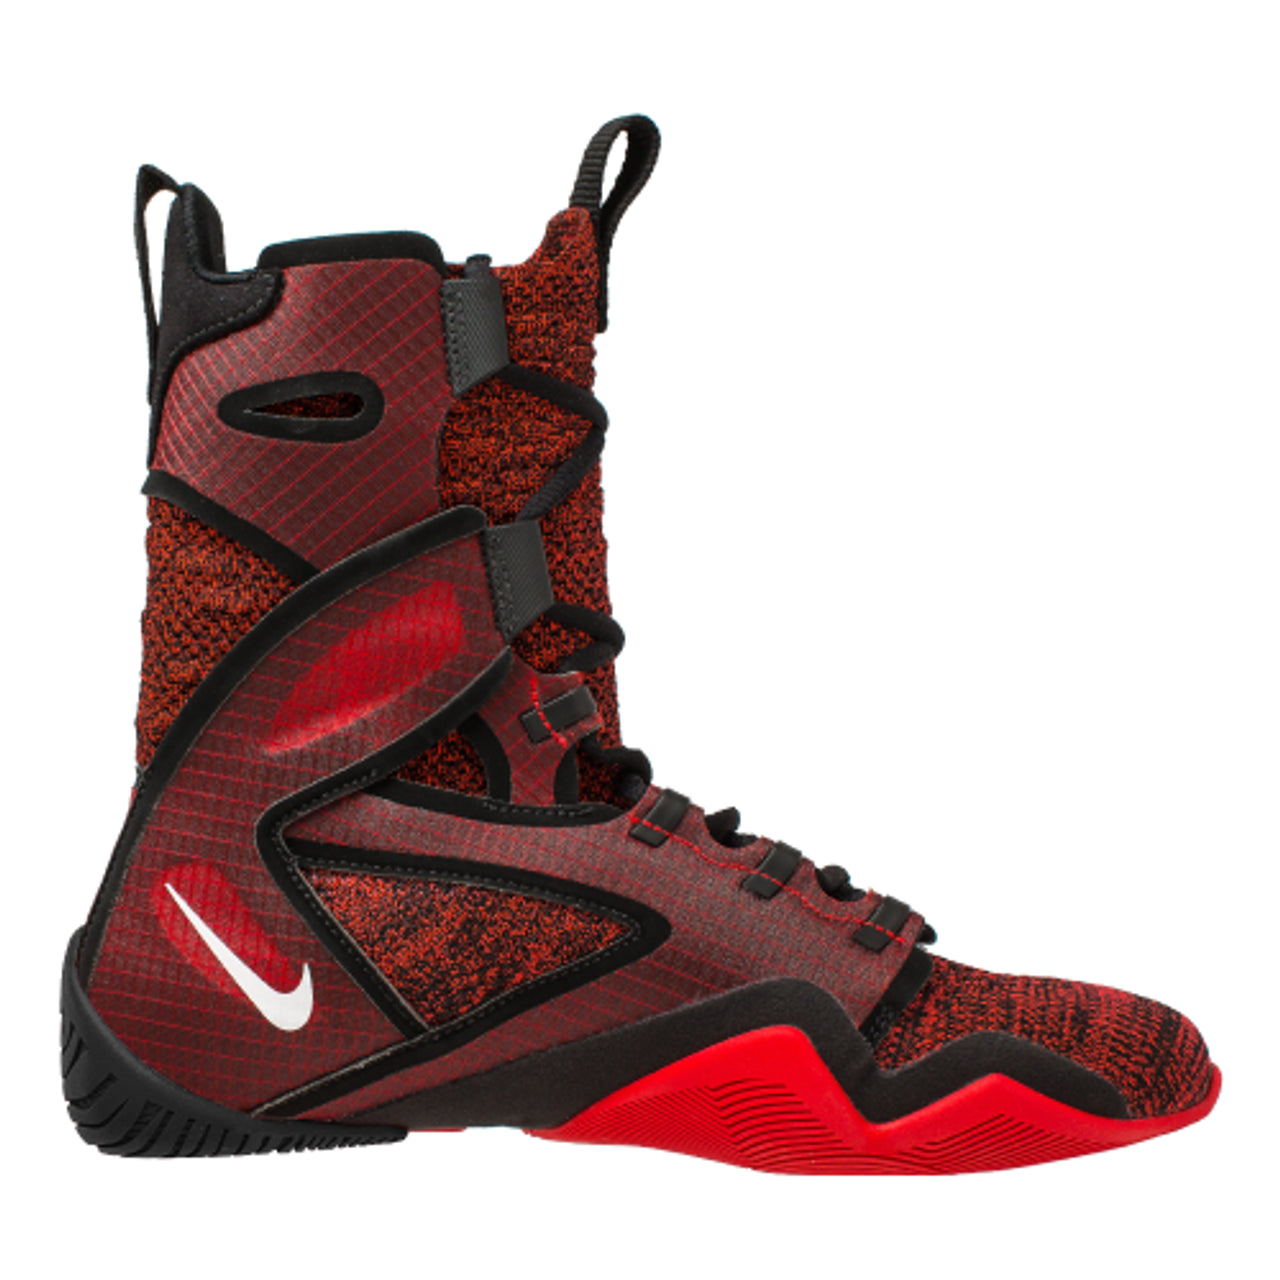 NIKE HYPERKO 2 Boxing Shoes Red